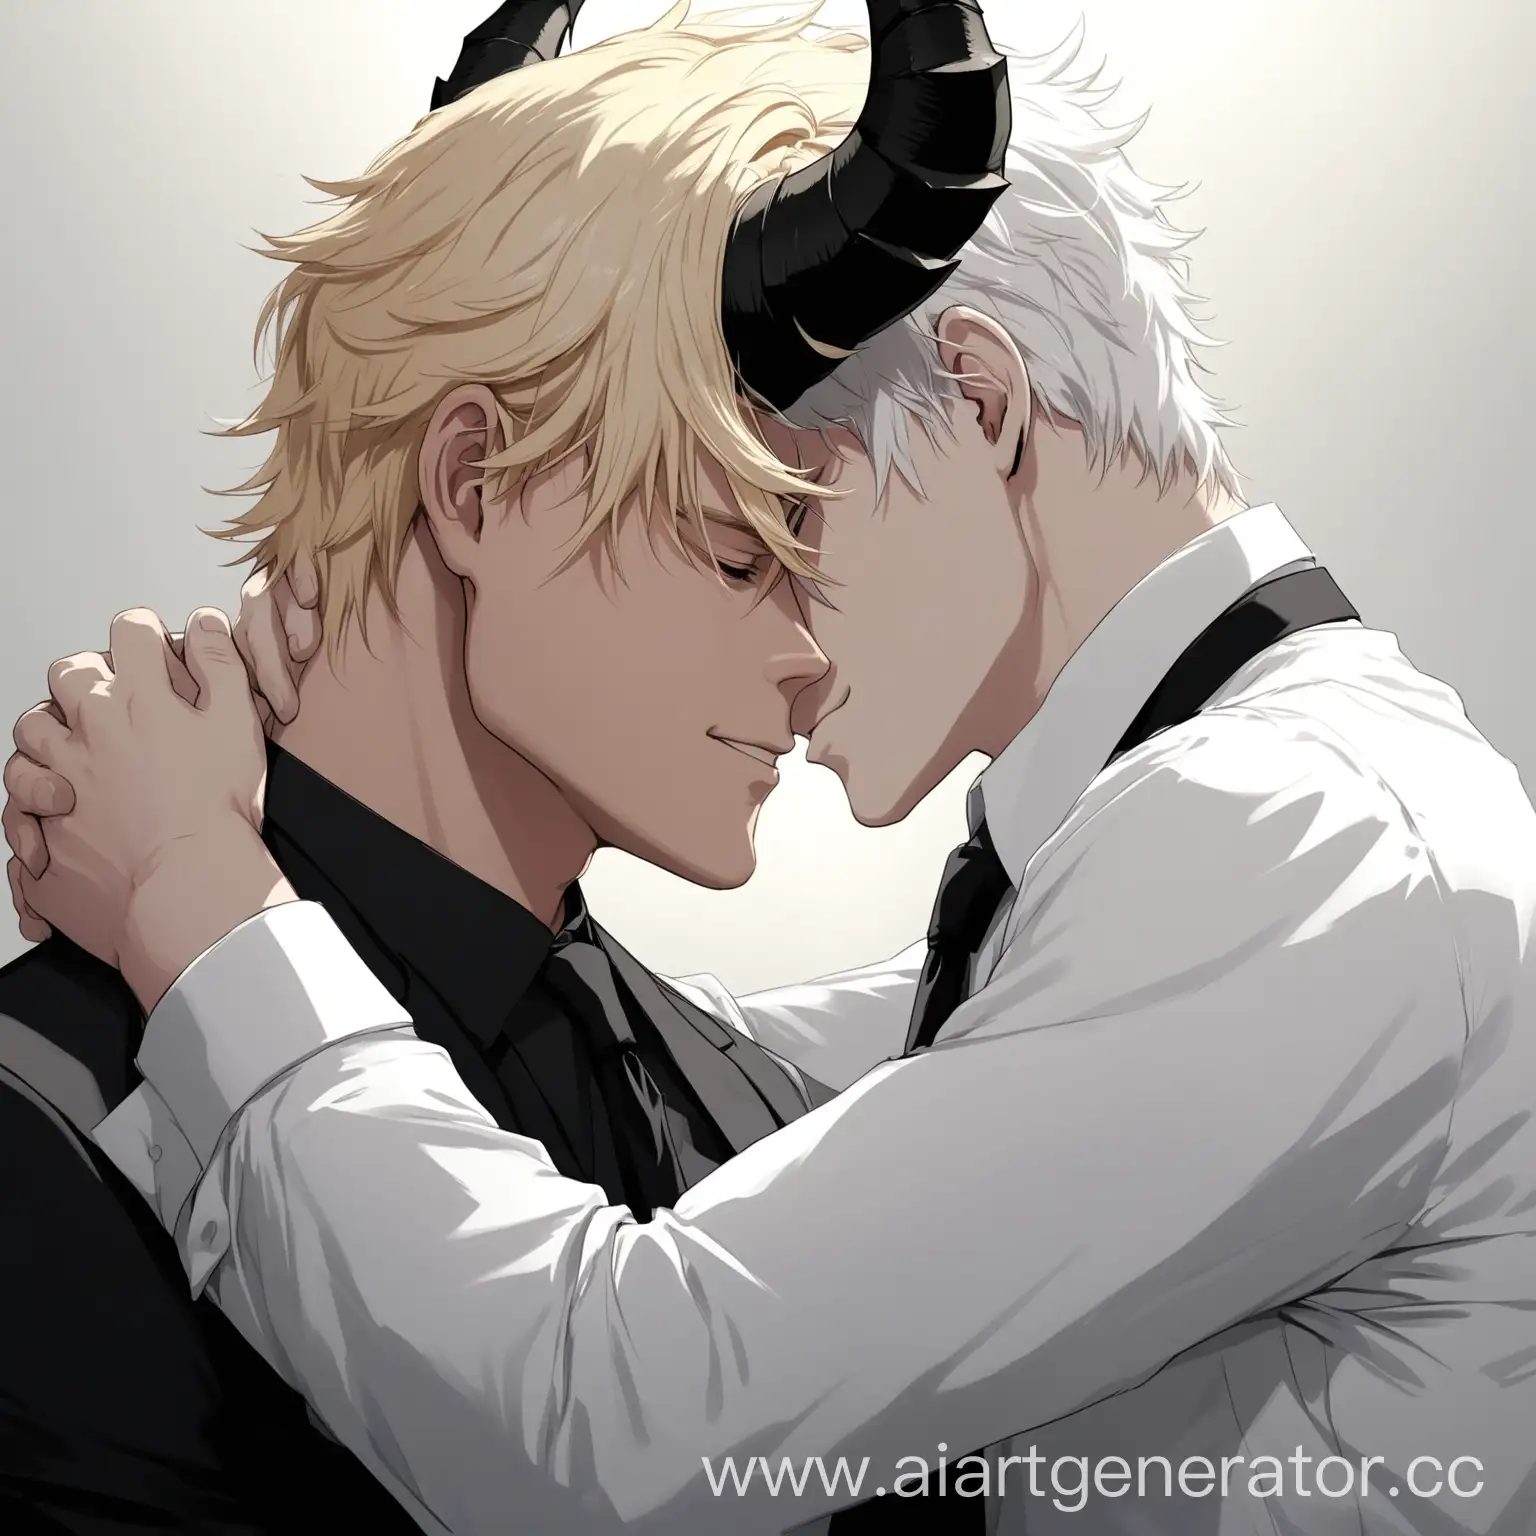 Blonde-Guy-Embracing-Horned-Companion-in-Formal-Attire